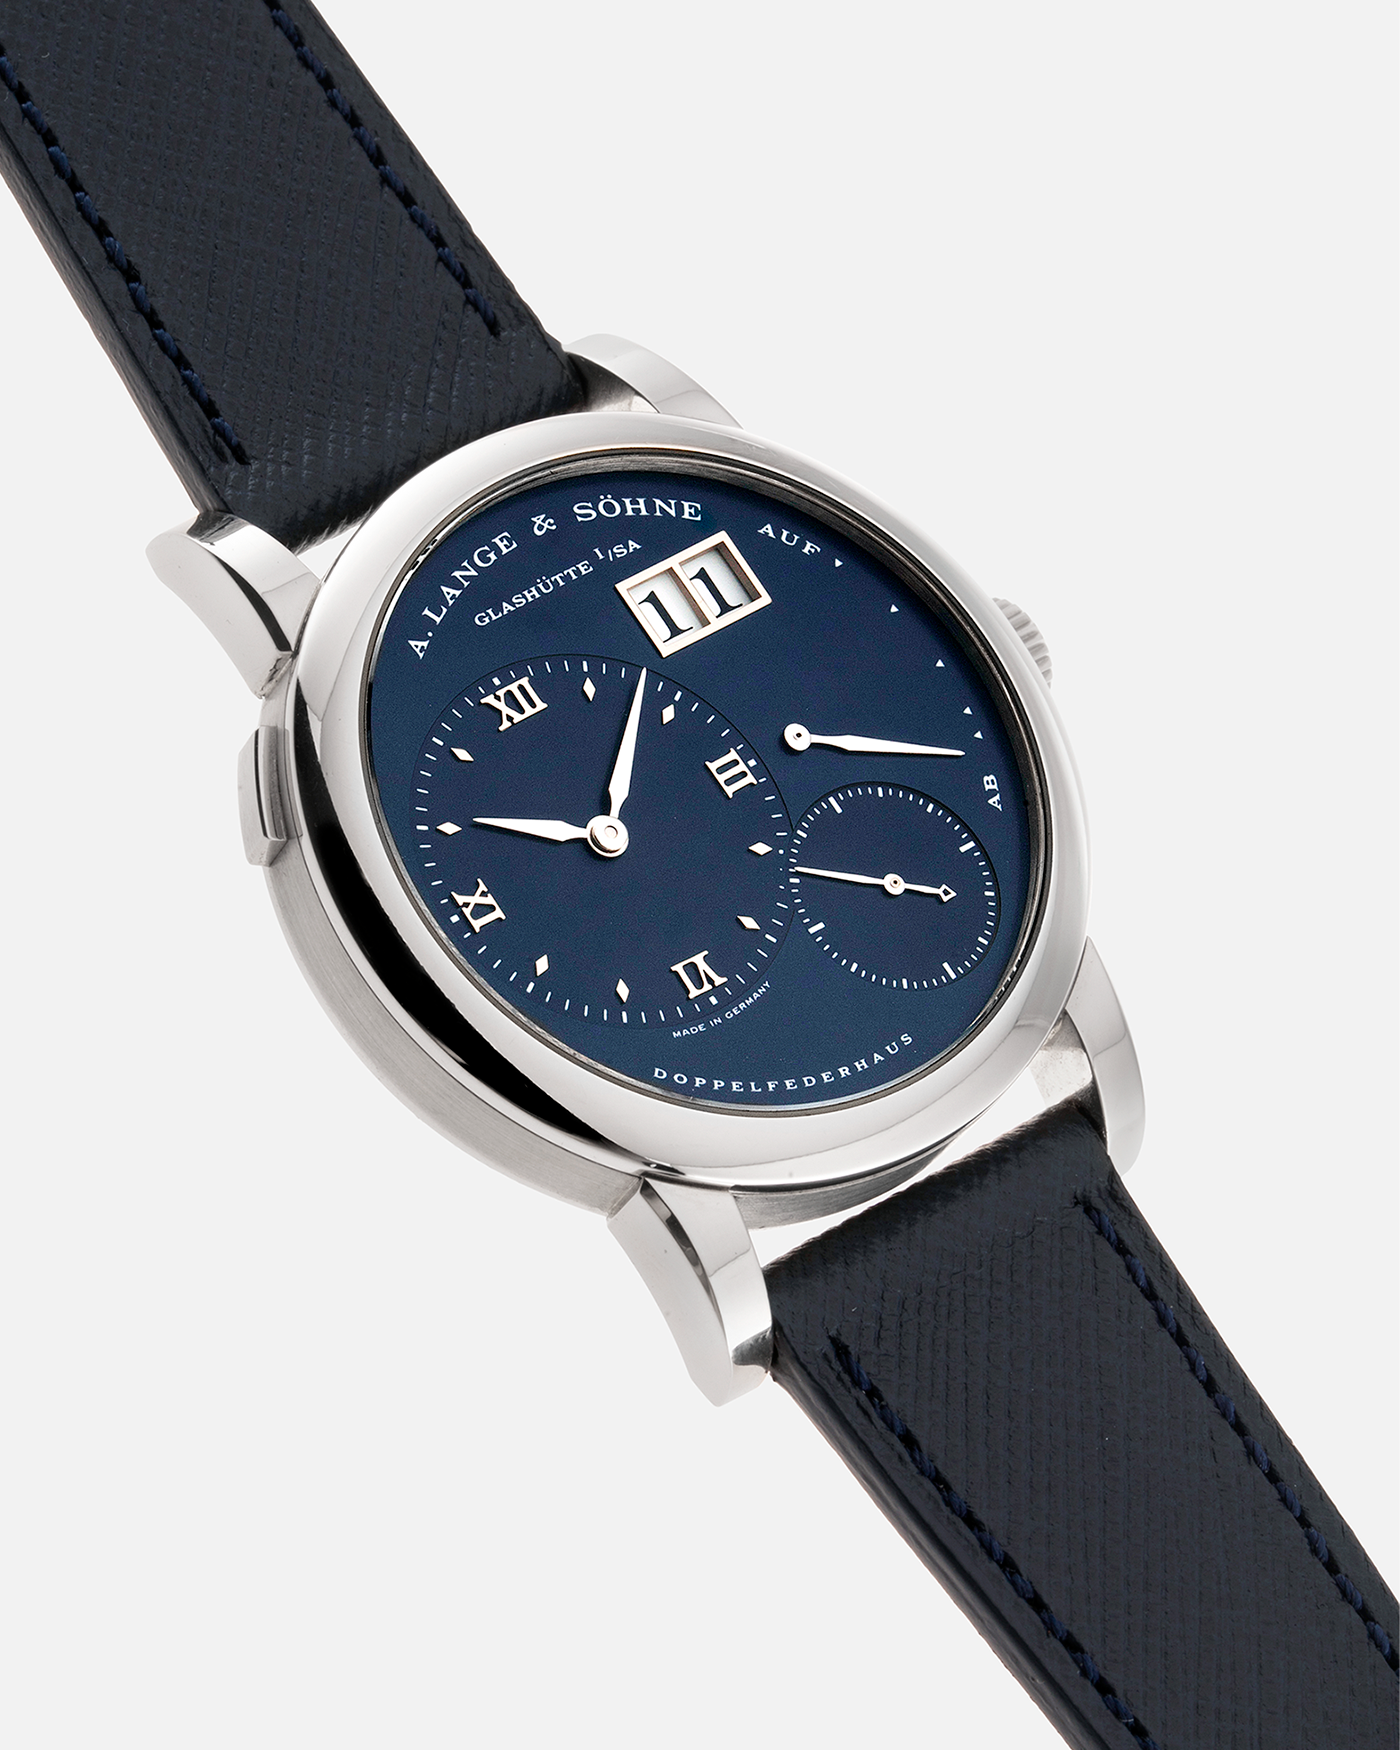 Brand: A. Lange & Sohne Year: 2000’s Model: Lange 1  Reference Number: 101.027 Material: 18k White Gold Movement: Manual Winding L901.5 Case Diameter: 38.5mm Bracelet/Strap: Molequin Navy Blue Textured Calf with 18k White Gold A. Lange & Sohne Tang Buckle